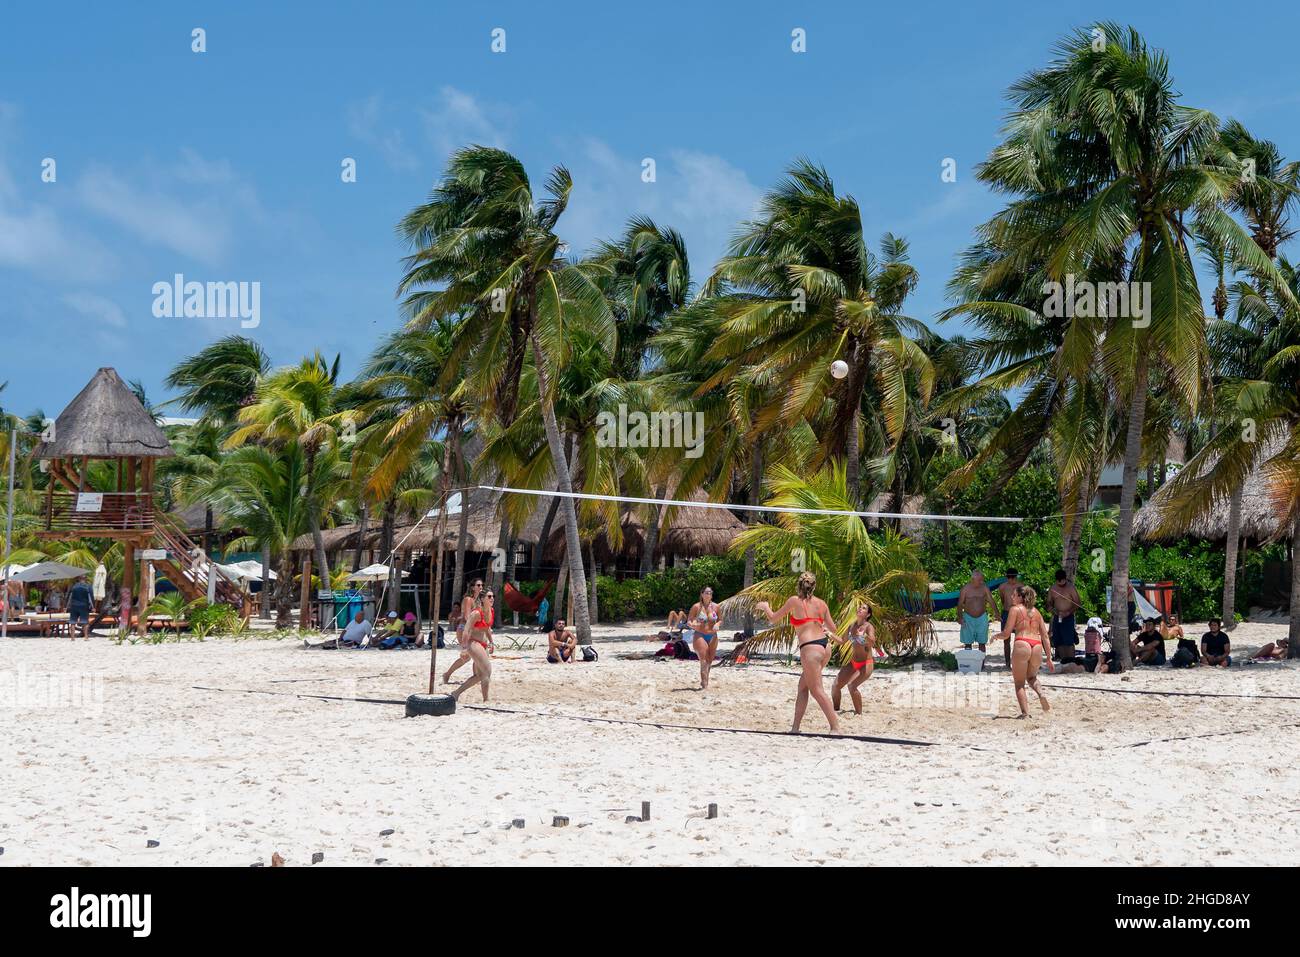 Isla Mujeres, Cancun, Mexico - September 13, 2021: Beautiful Caribbean beach Playa Norte or North beach on the Isla Mujeres near Cancun with people Stock Photo